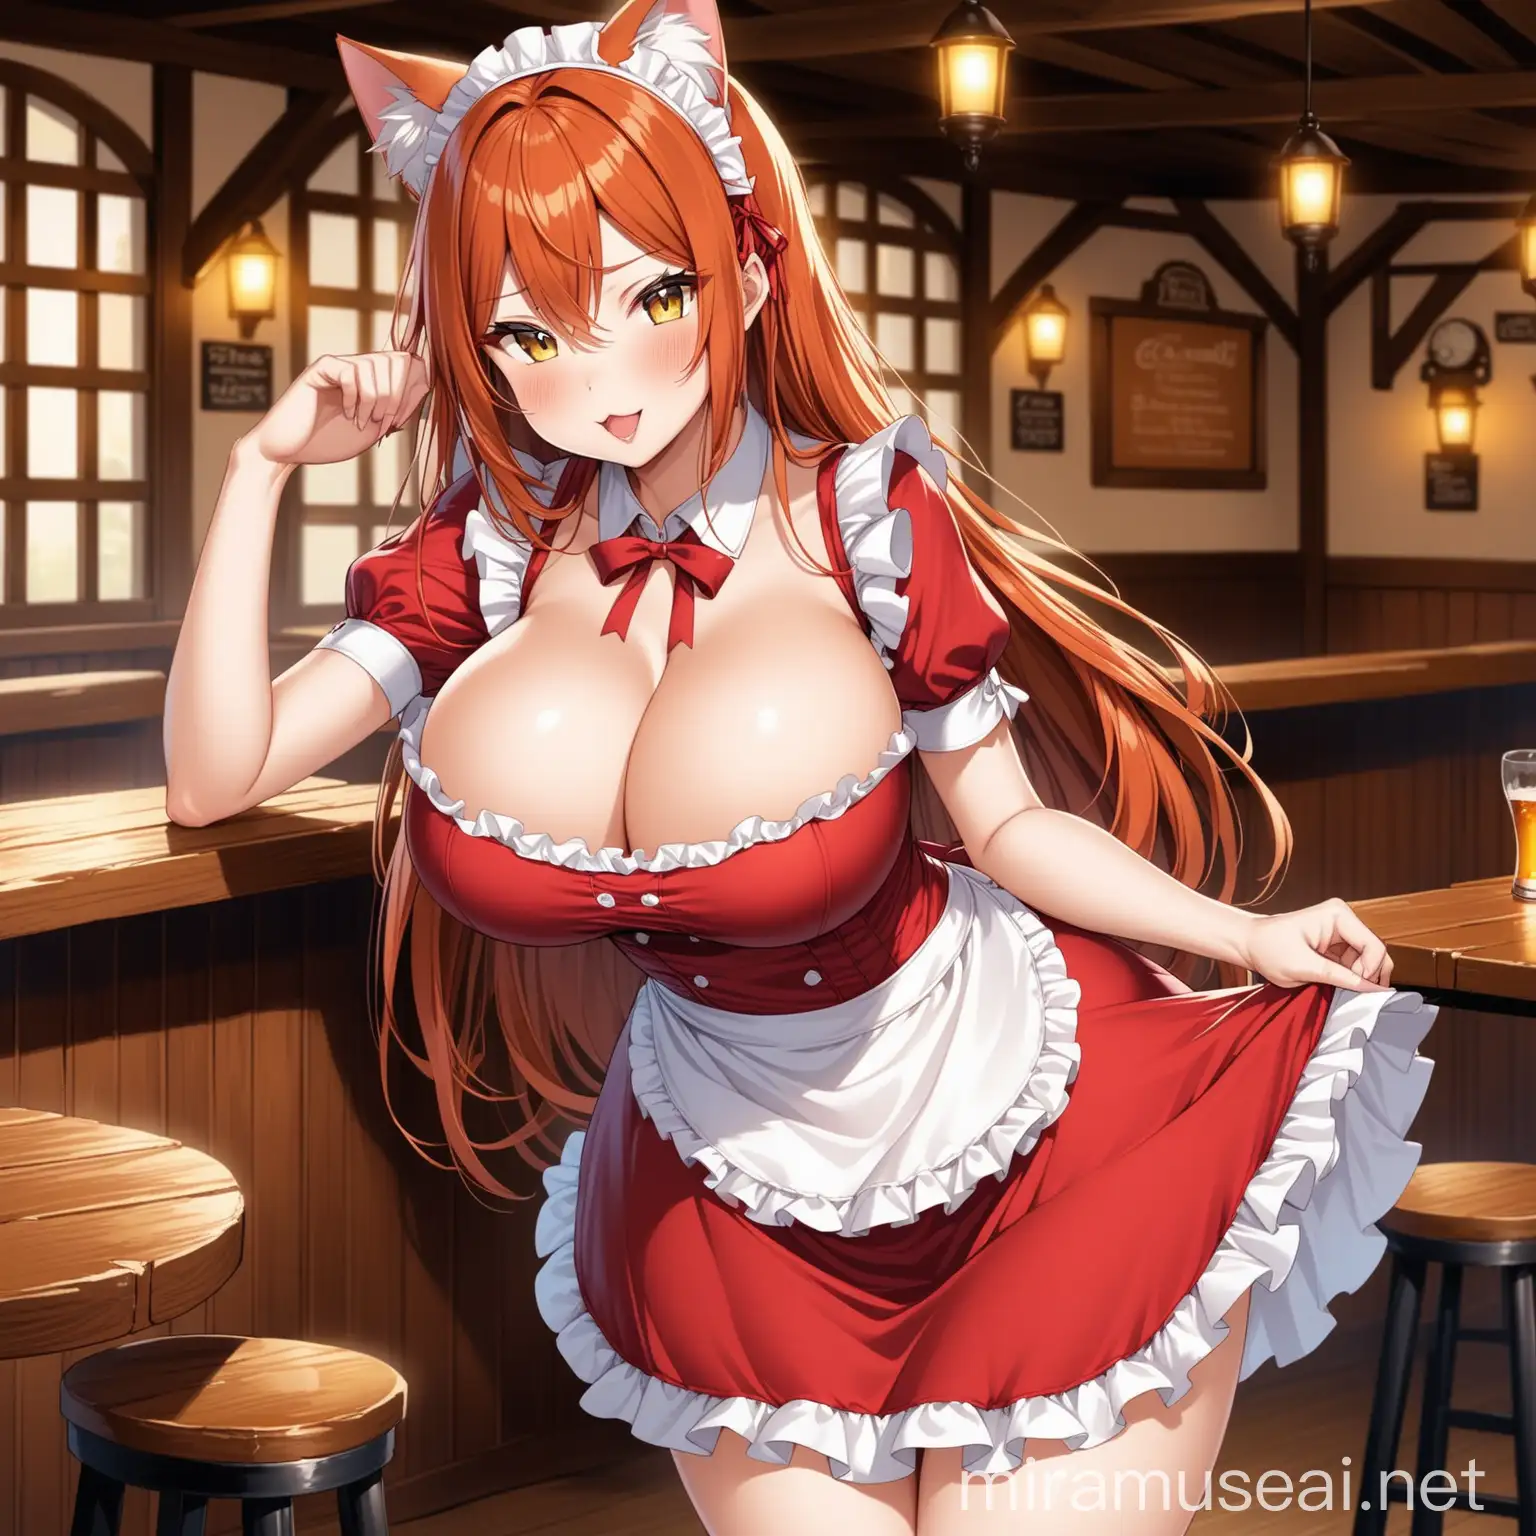 Sensual Cat Girl Maid in a Red Dress at a Bustling Tavern